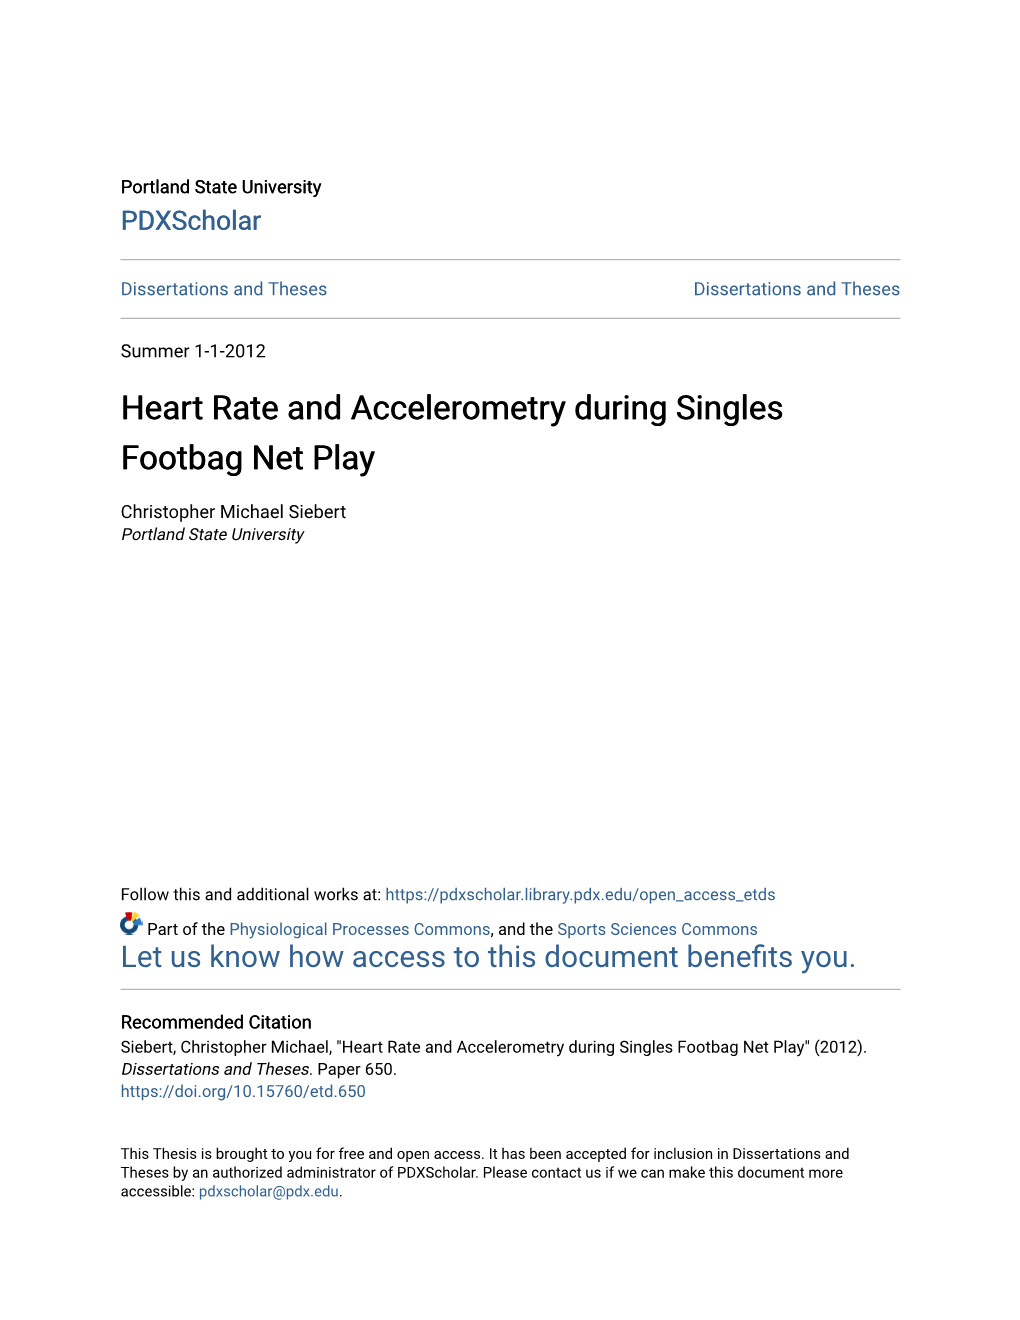 Heart Rate and Accelerometry During Singles Footbag Net Play